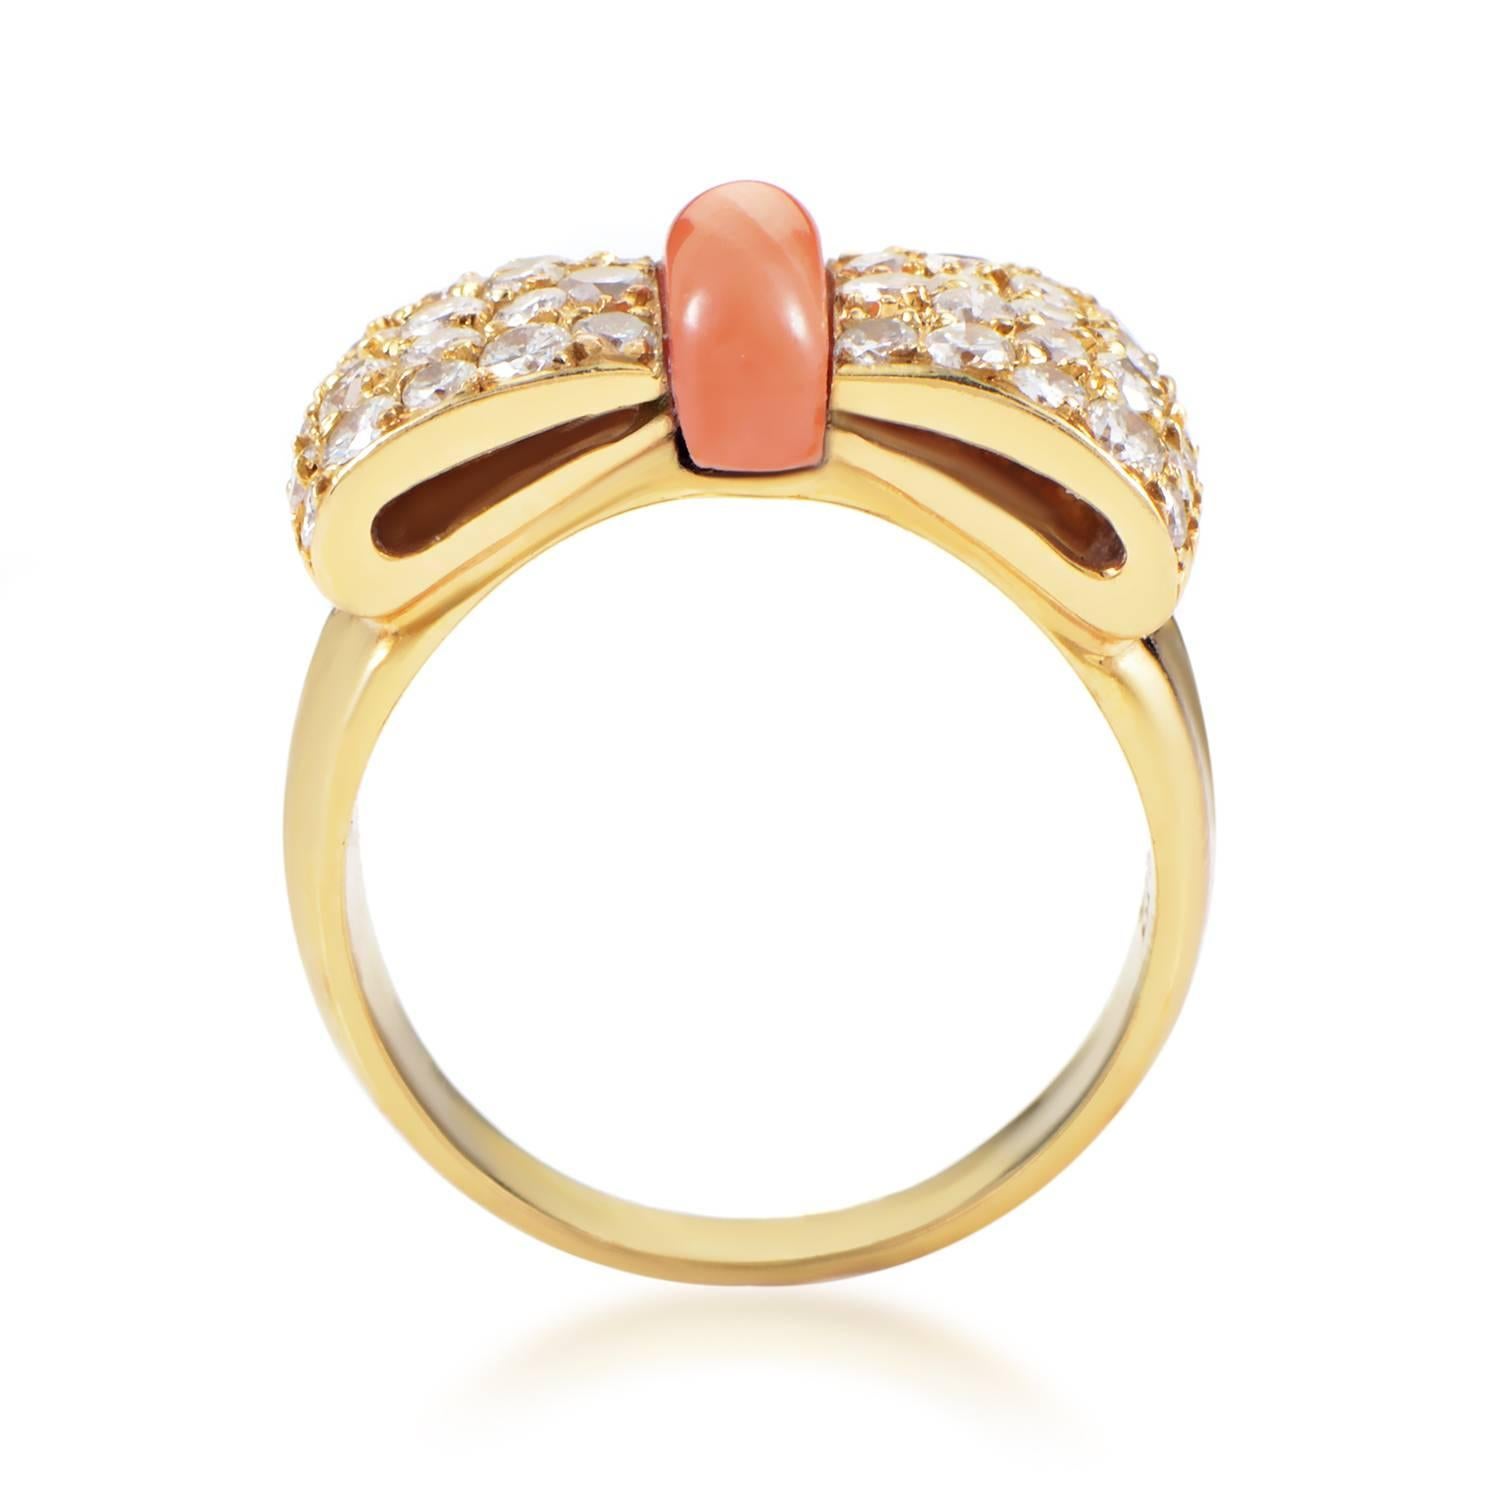 The compelling shape of a bow tie graces the top of this spellbinding ring from van Cleef & Arpels, with enchanting 18K yellow gold adorned with glittering diamonds weighing in total 1.00 carat and complemented by a neat coral stone.
Ring Size: 5.5